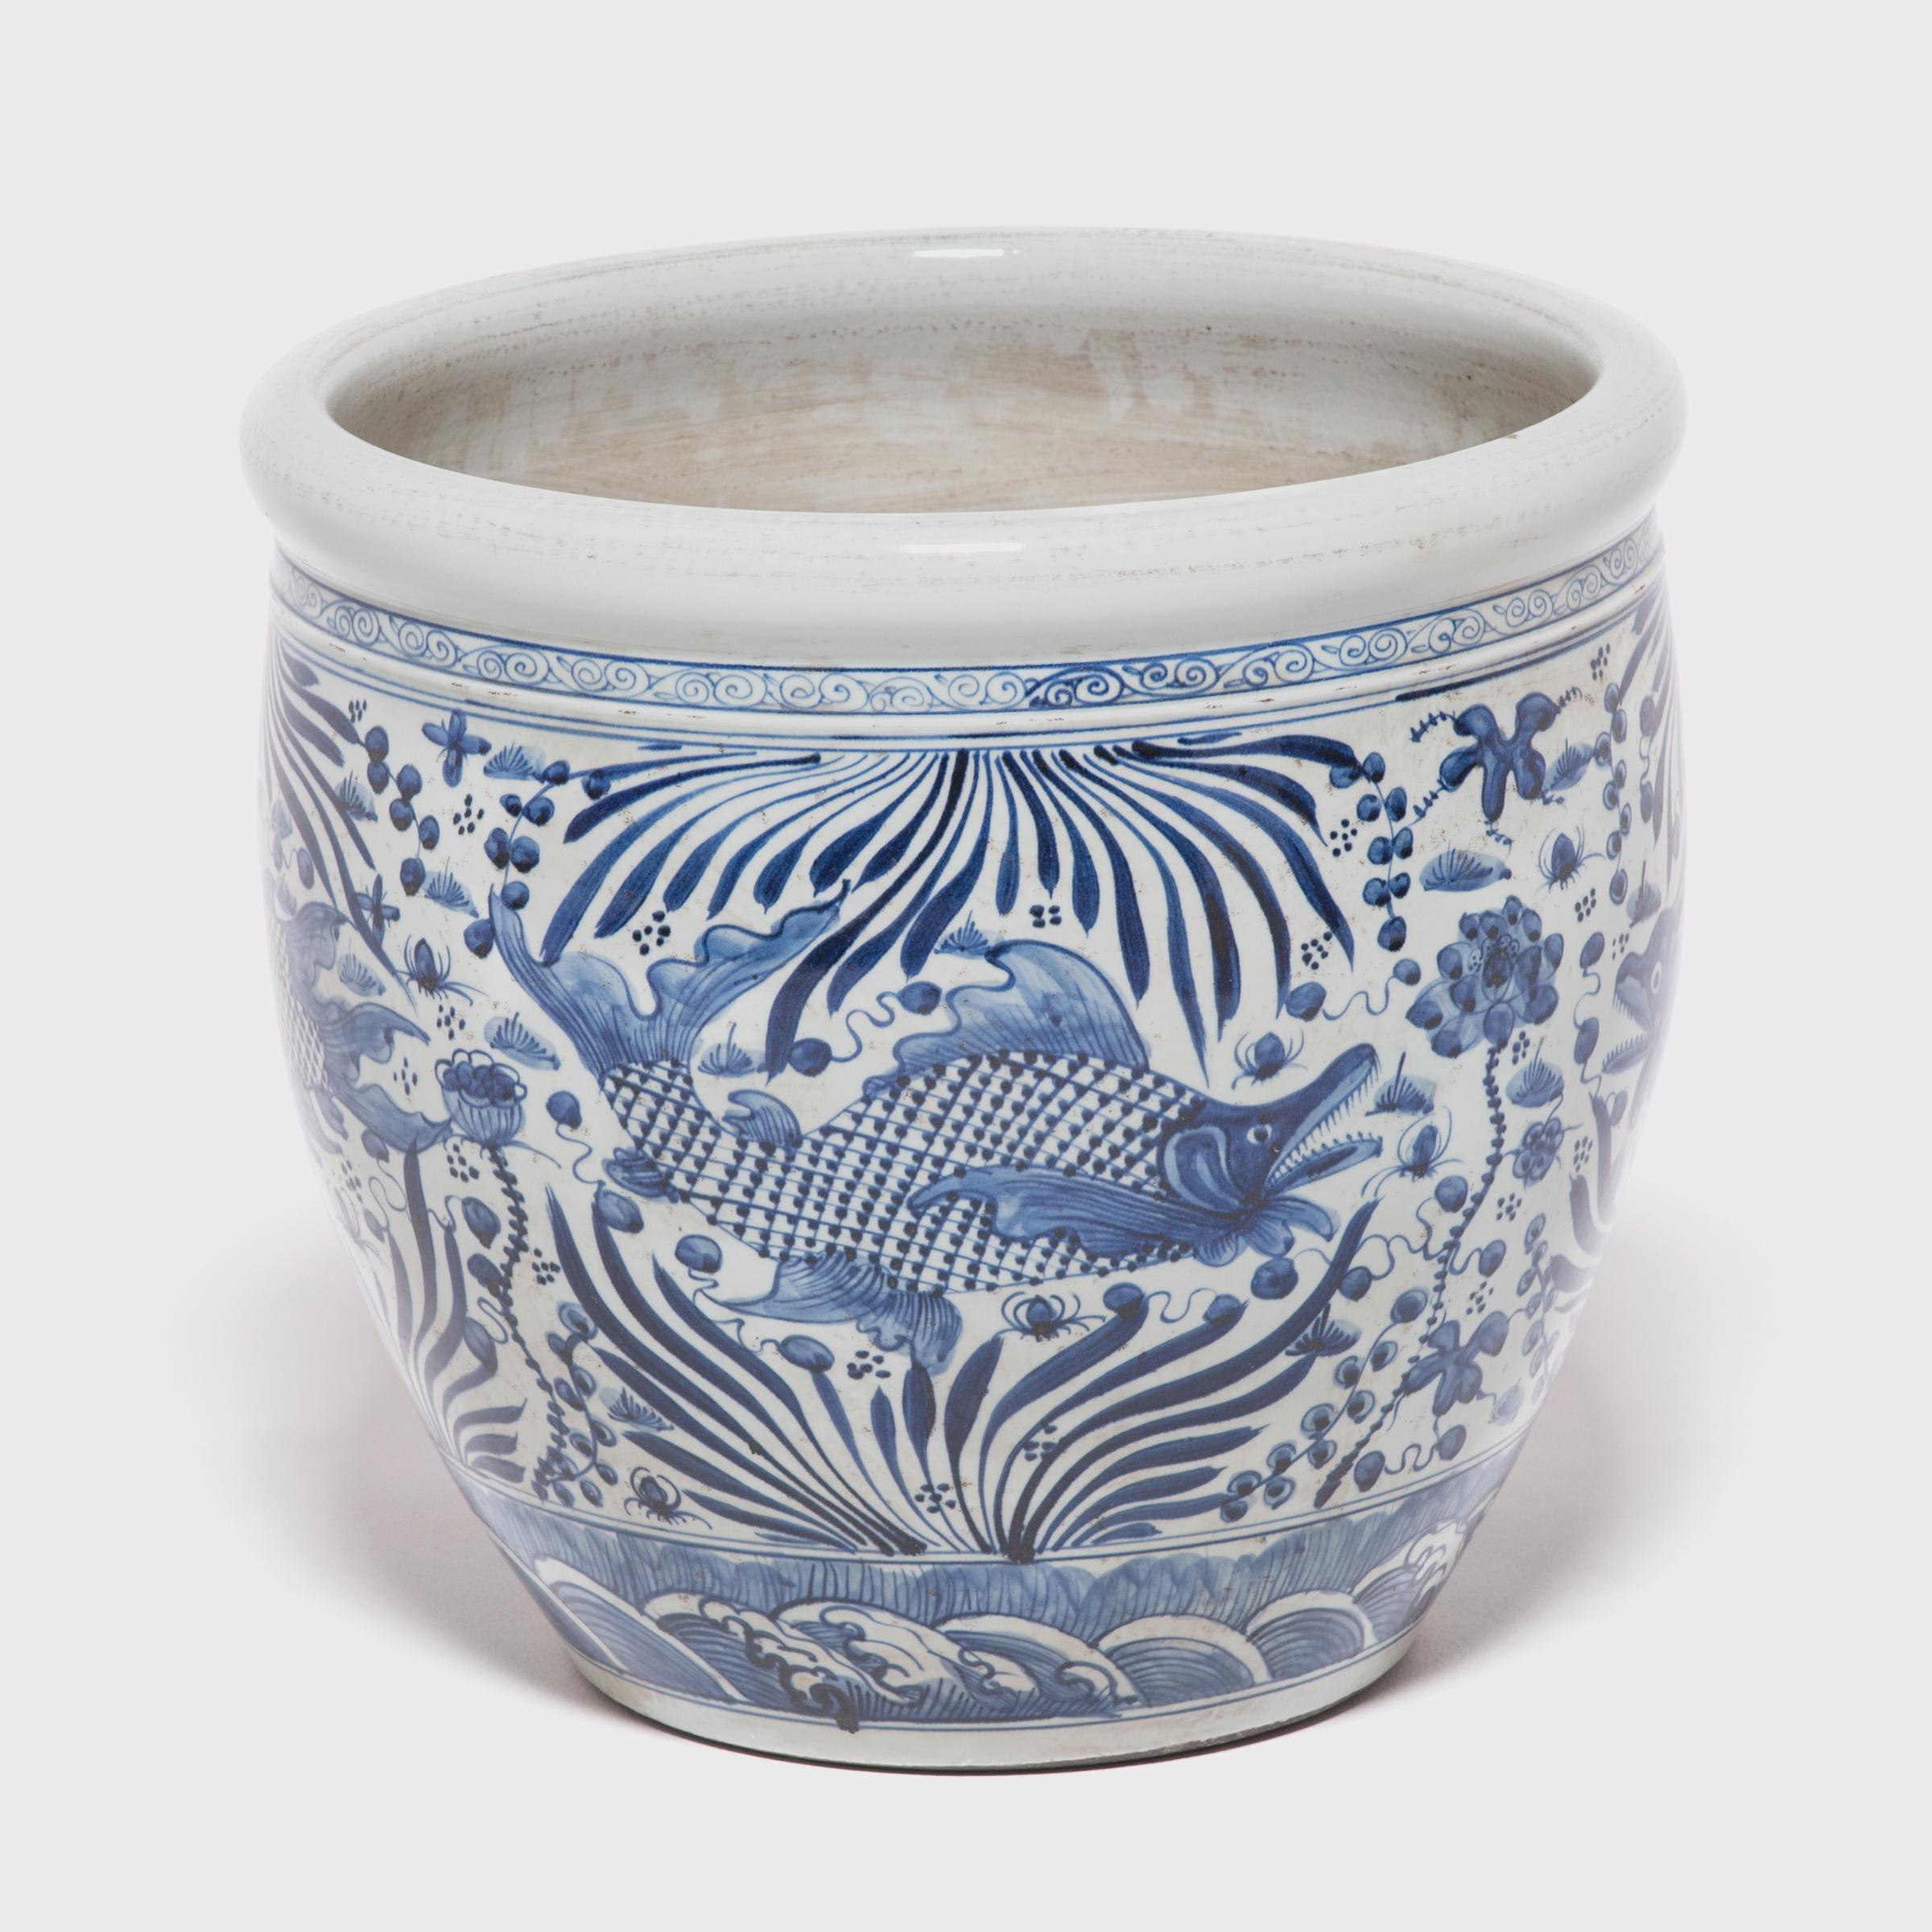 This grand, blue-and-white porcelain bowl is hand-painted with flora and fauna of the sea, offering blessings of wealth, abundance, and the contented harmony of a fish in water. Chinese blue-and-white ceramics have inspired ceramists worldwide since